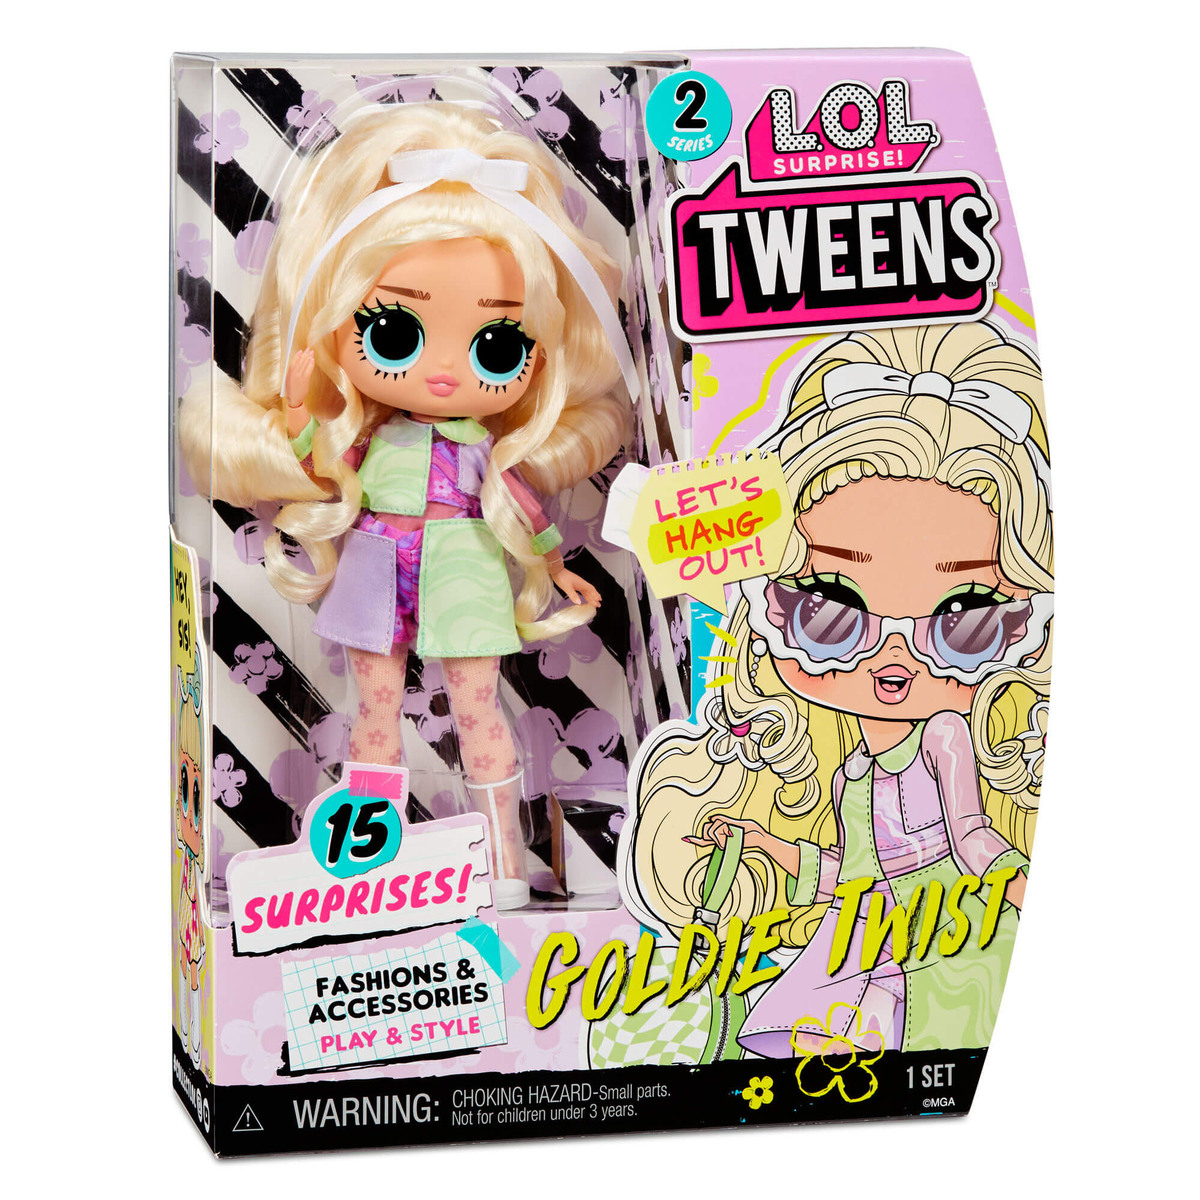 LOL Surprise Tweens Series 2 Fashion Doll Goldie Twist with 15 Surprises, MGA-579571-S2